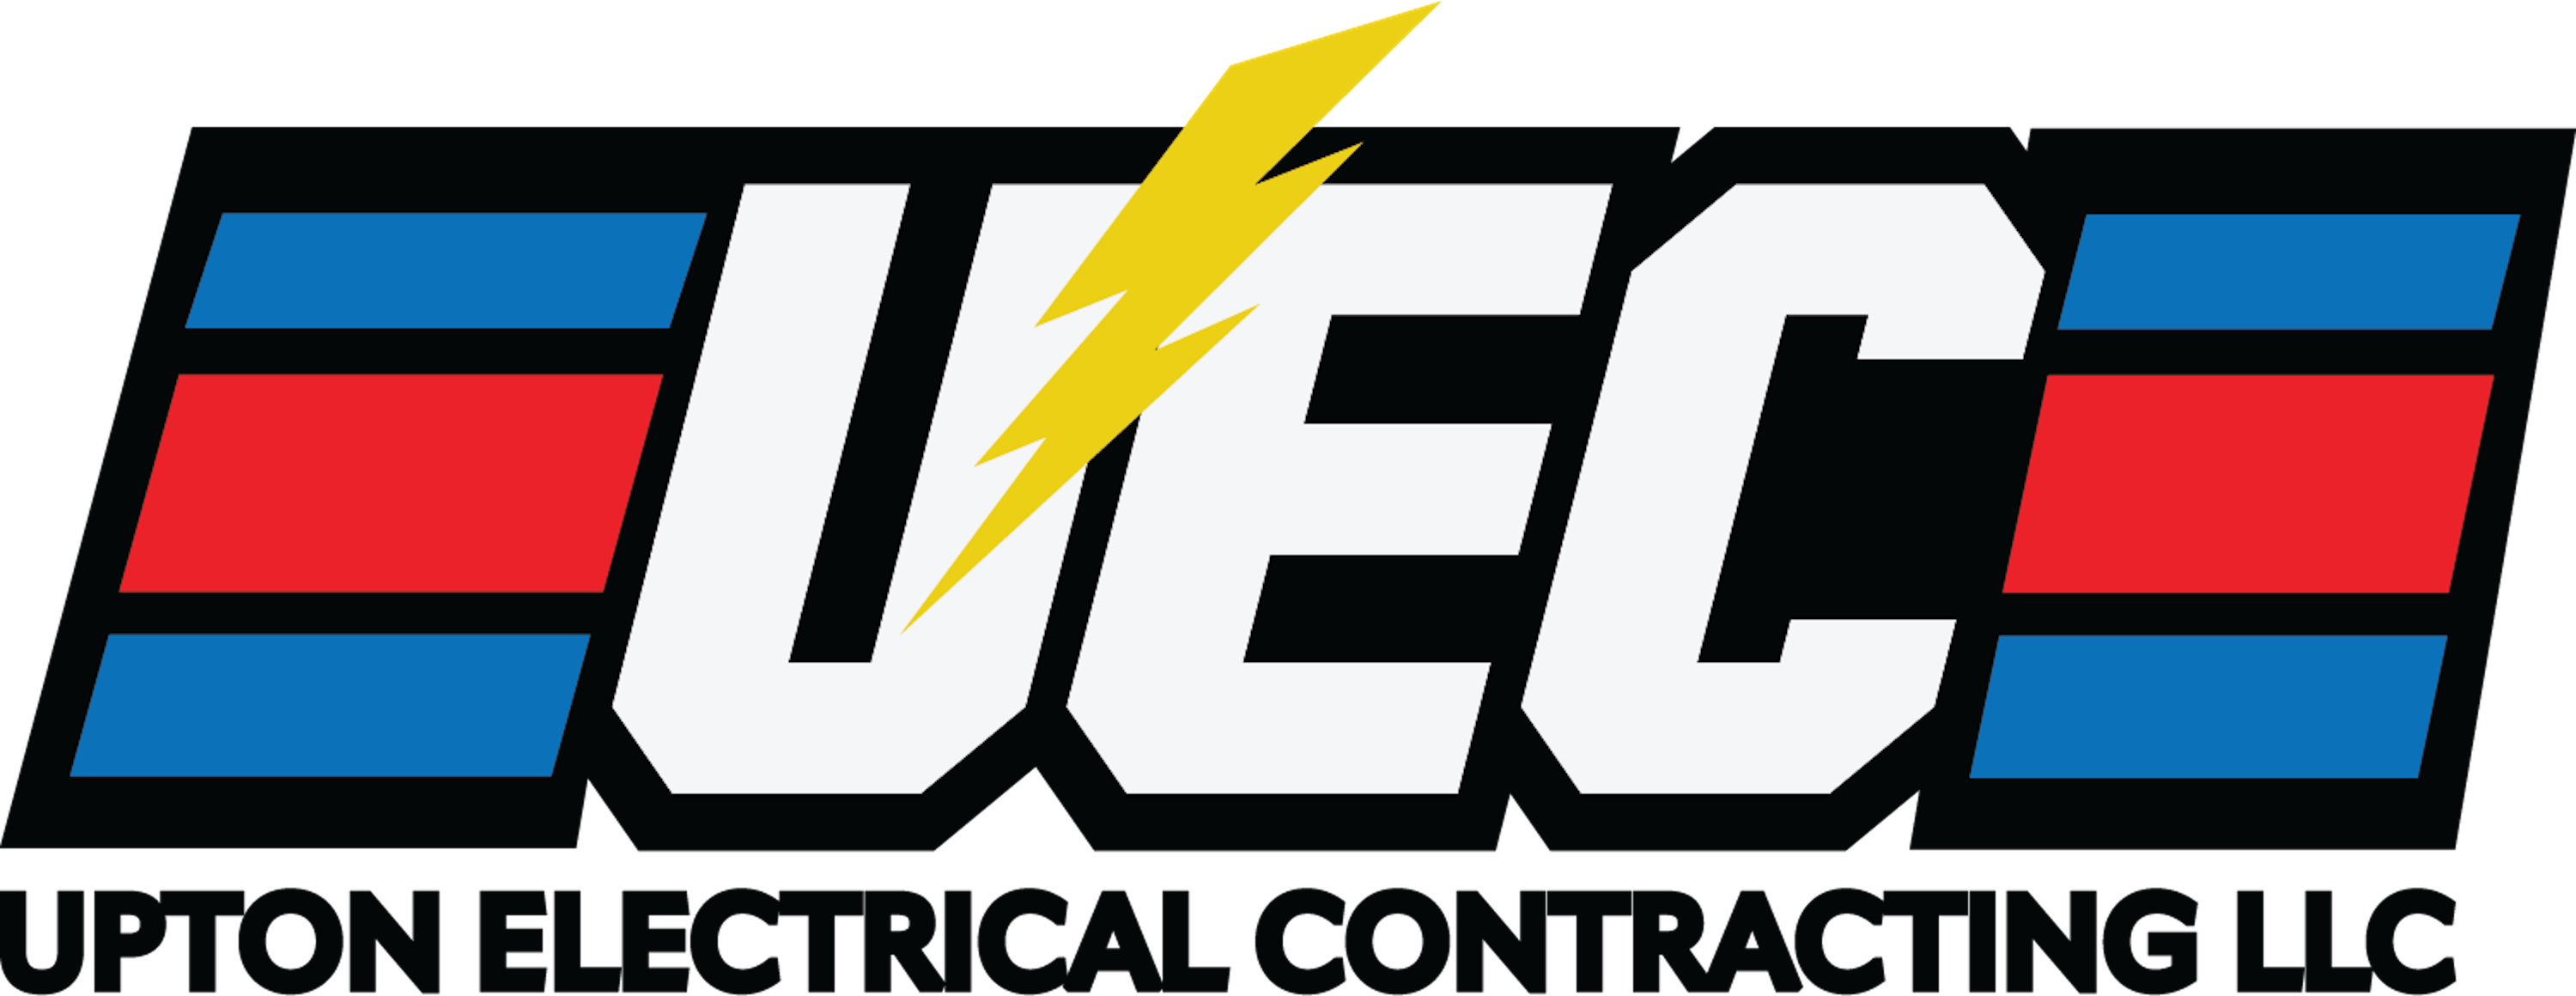 Upton Electrical Contracting, LLC Logo